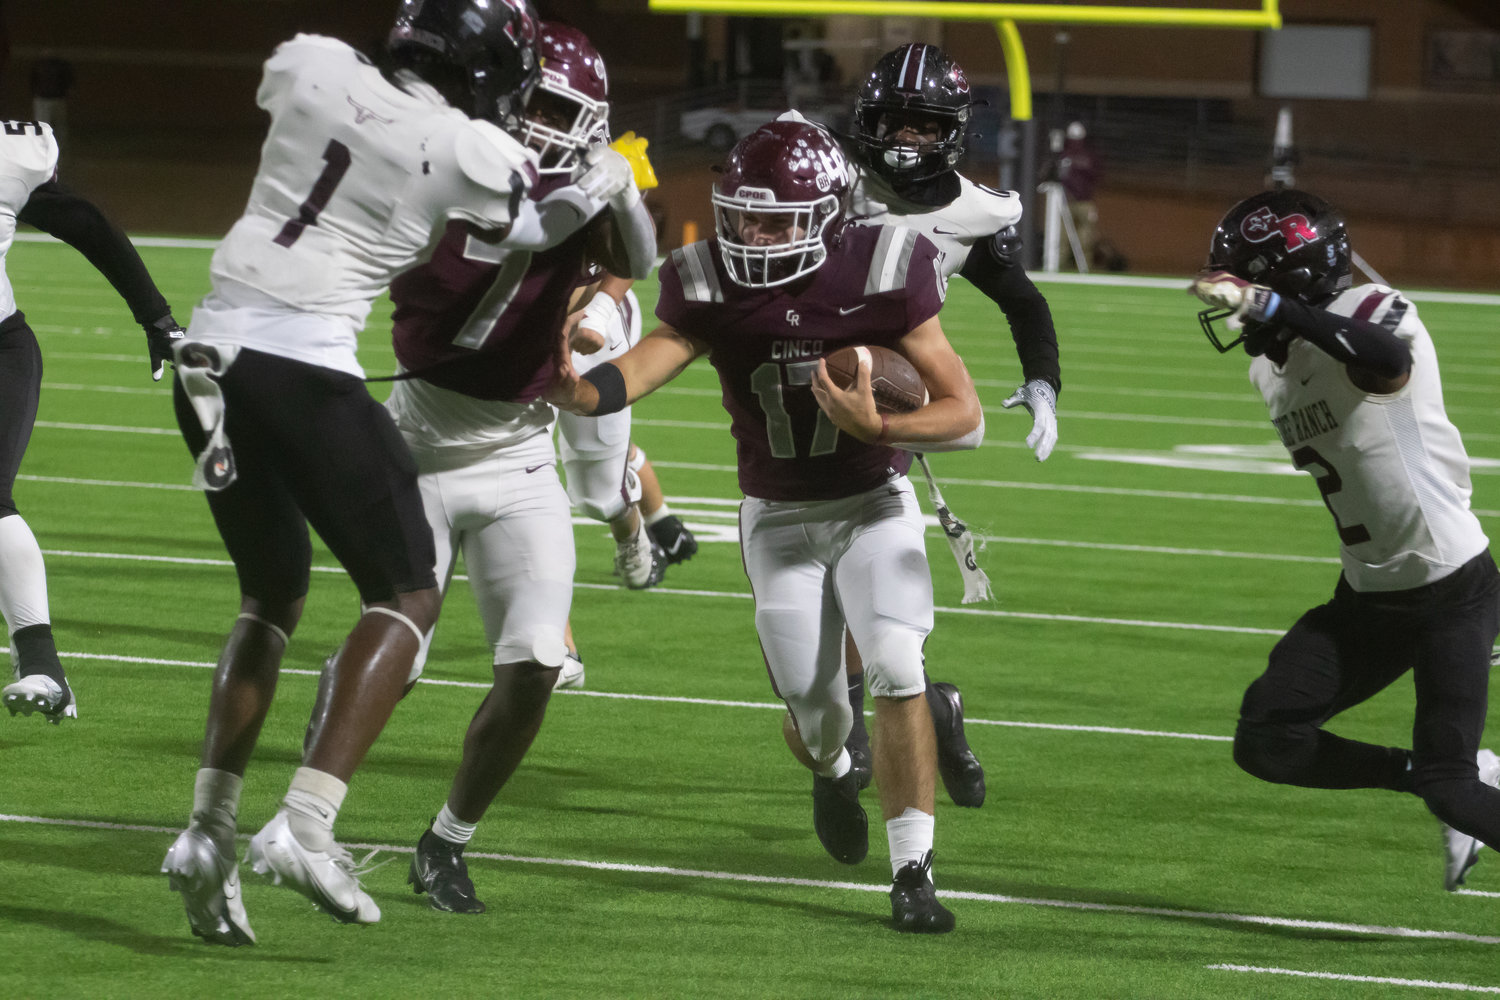 Eric Eckstrom rushes the ball during Friday's game between Cinco Ranch and George Ranch at Rhodes Stadium.